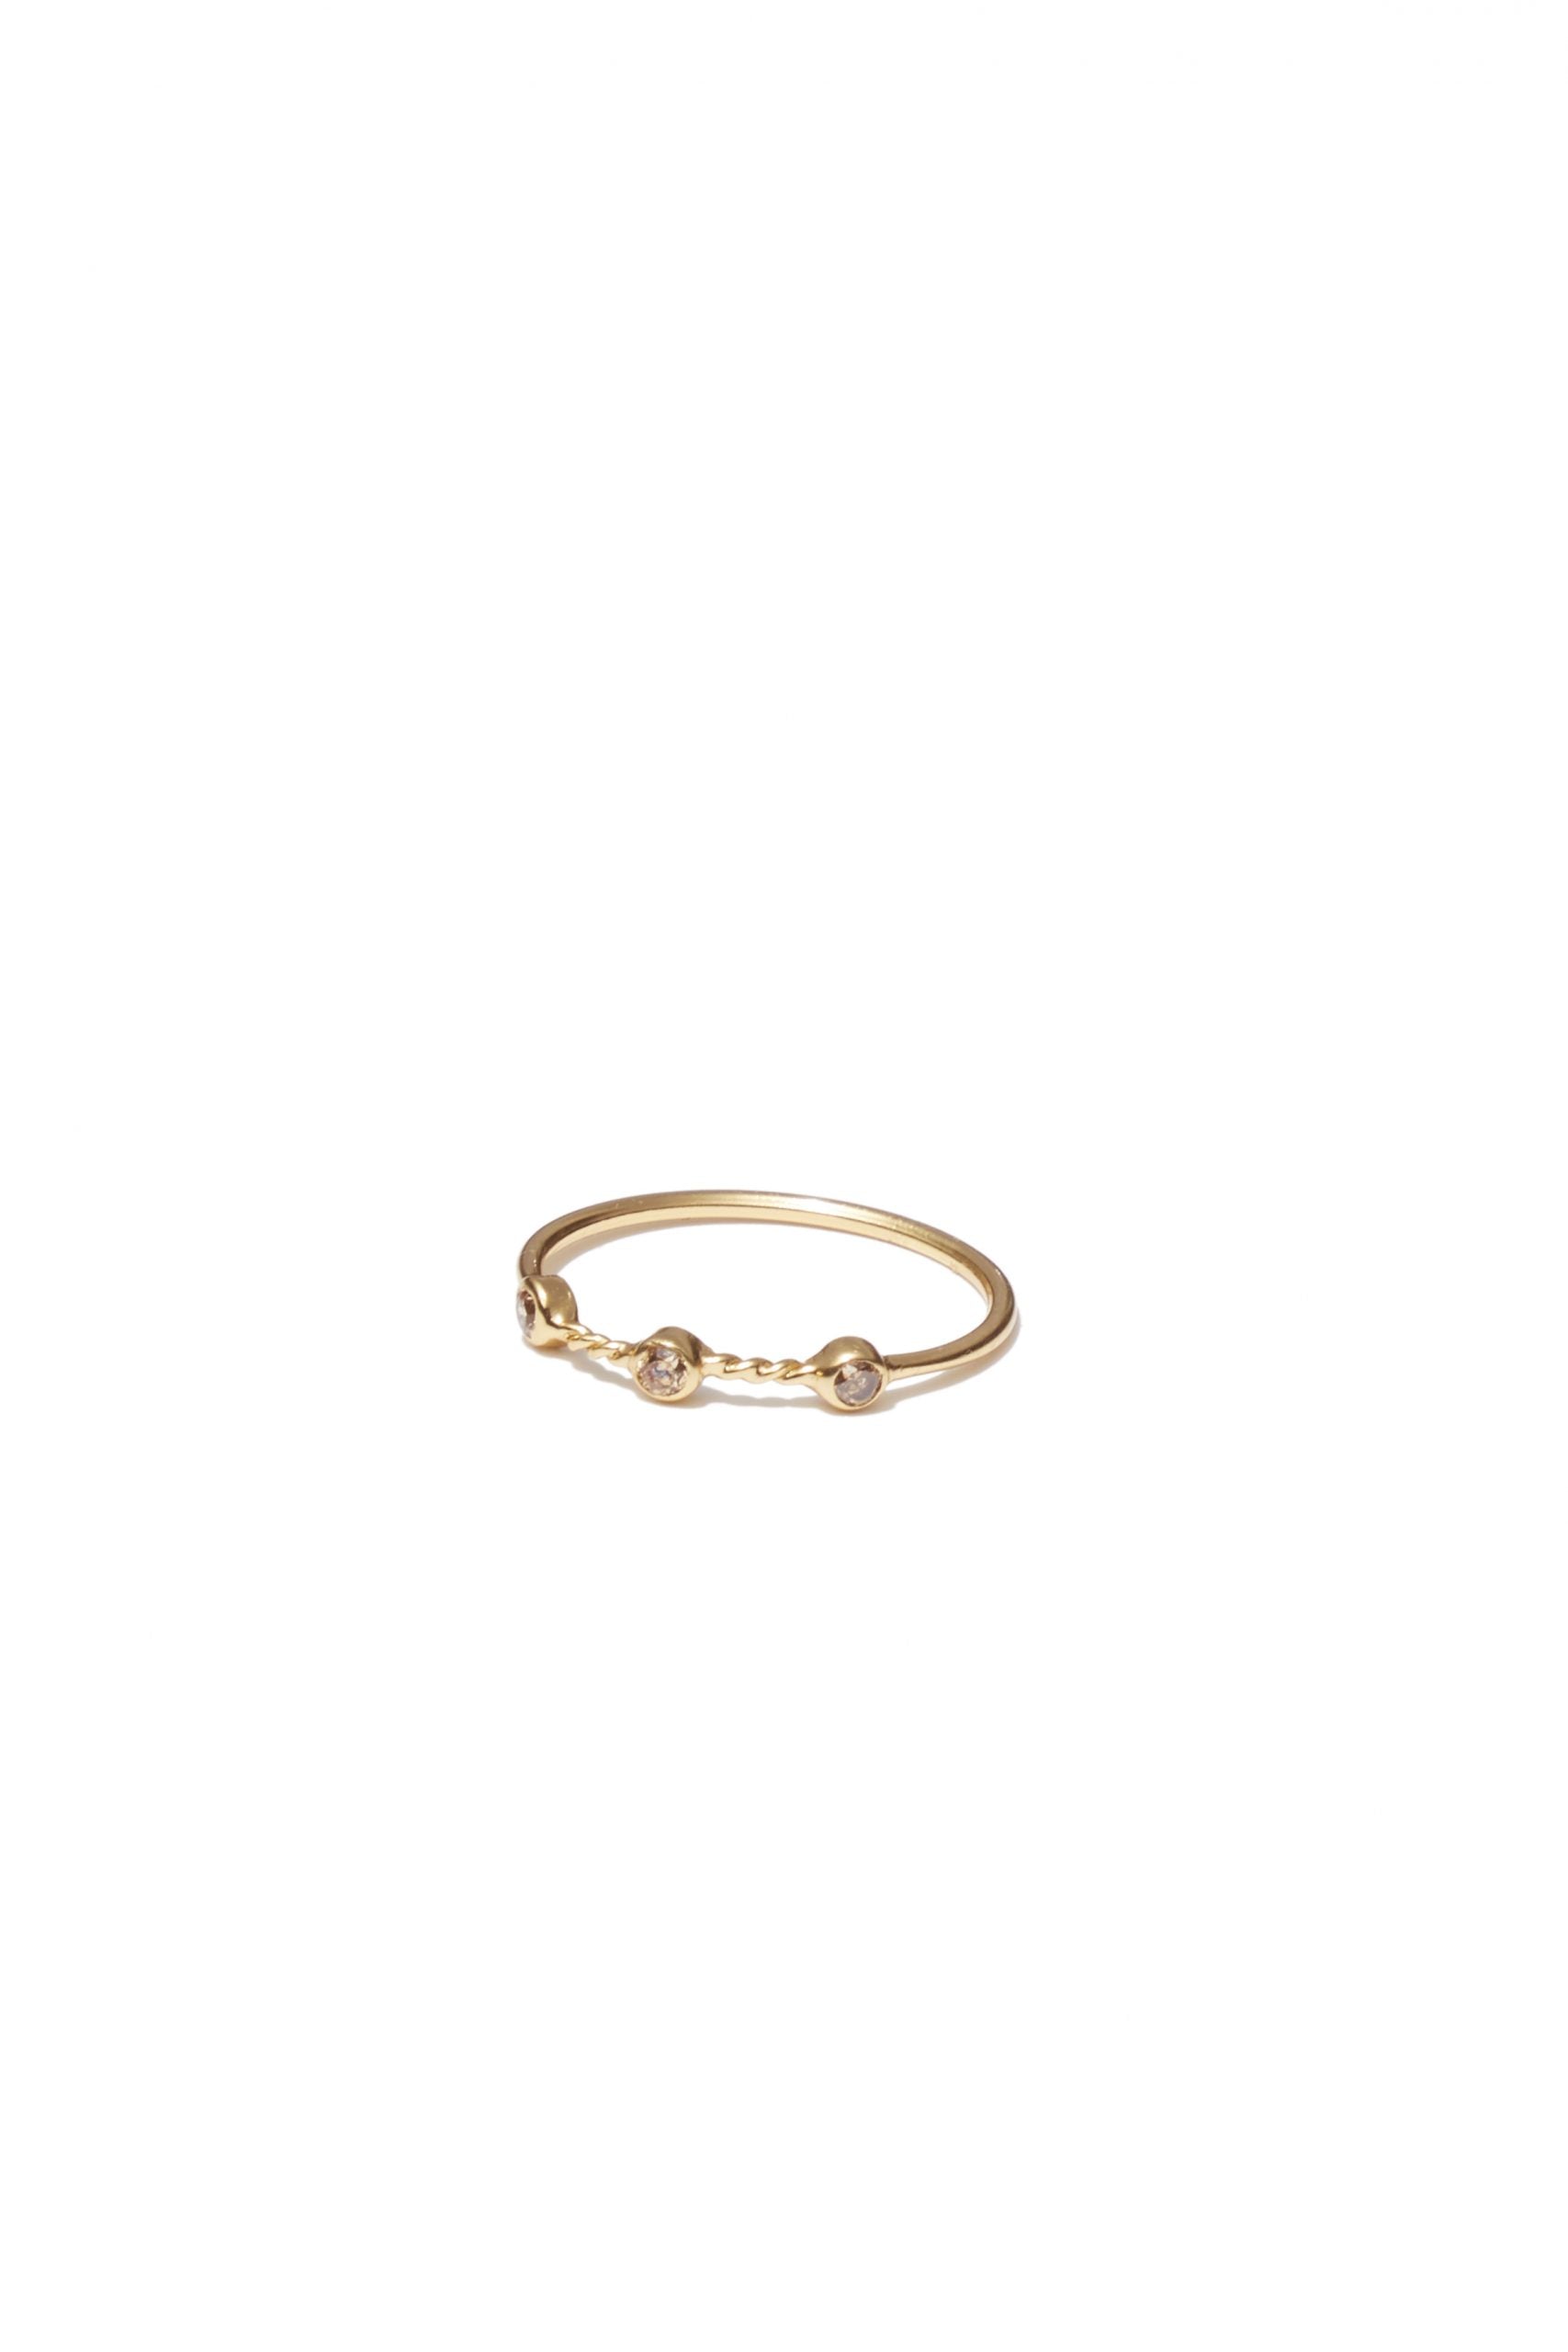 Soins champagne ring